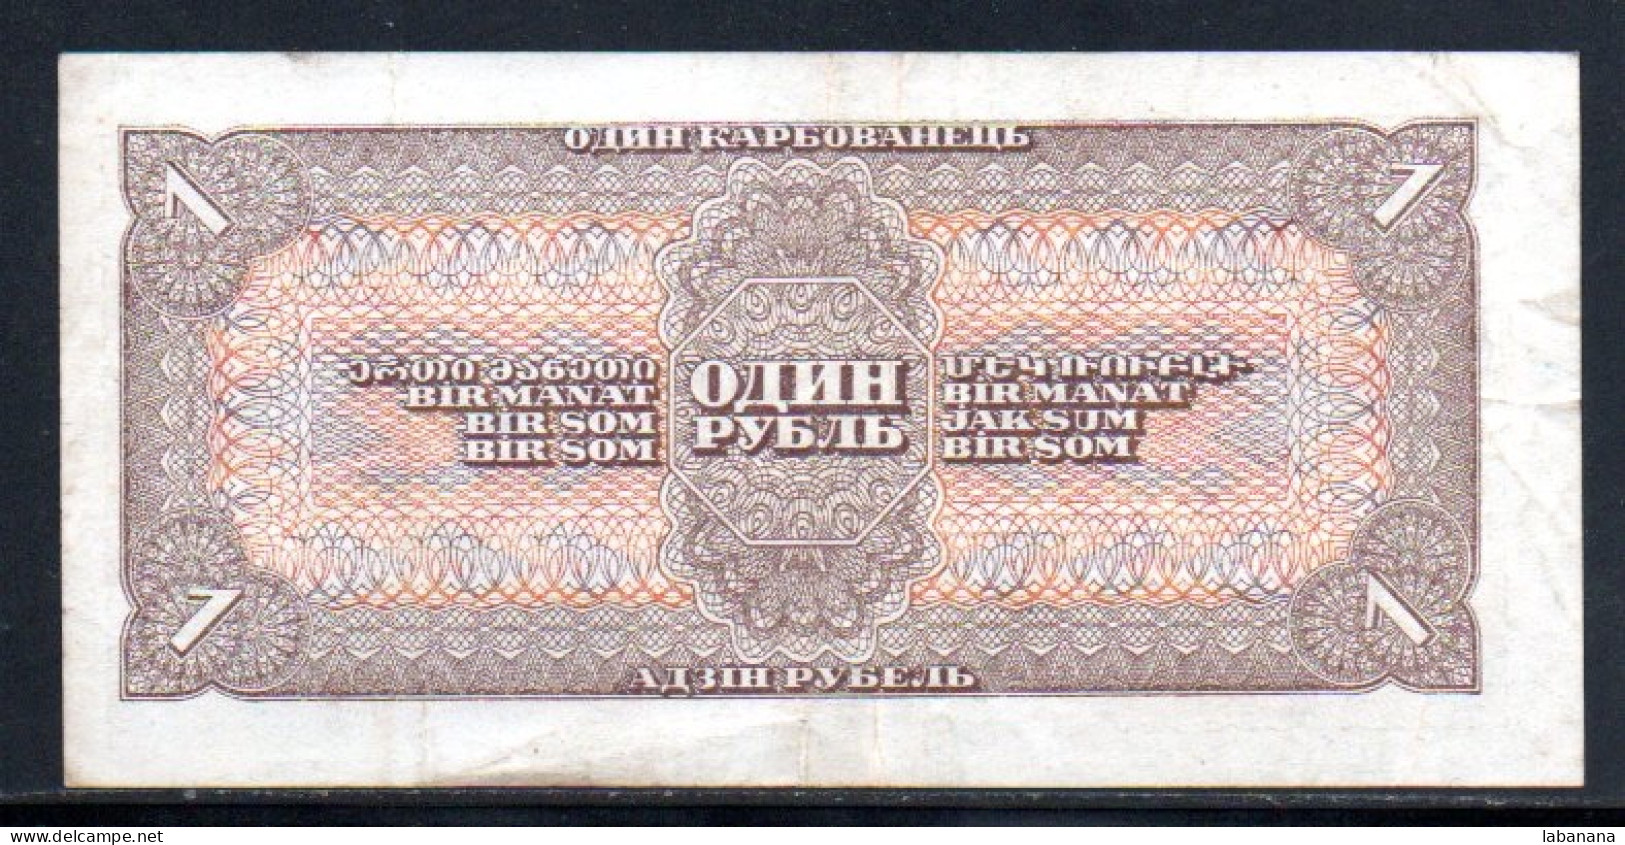 329-Russie 1 Rouble 1938 CA749 - Russland